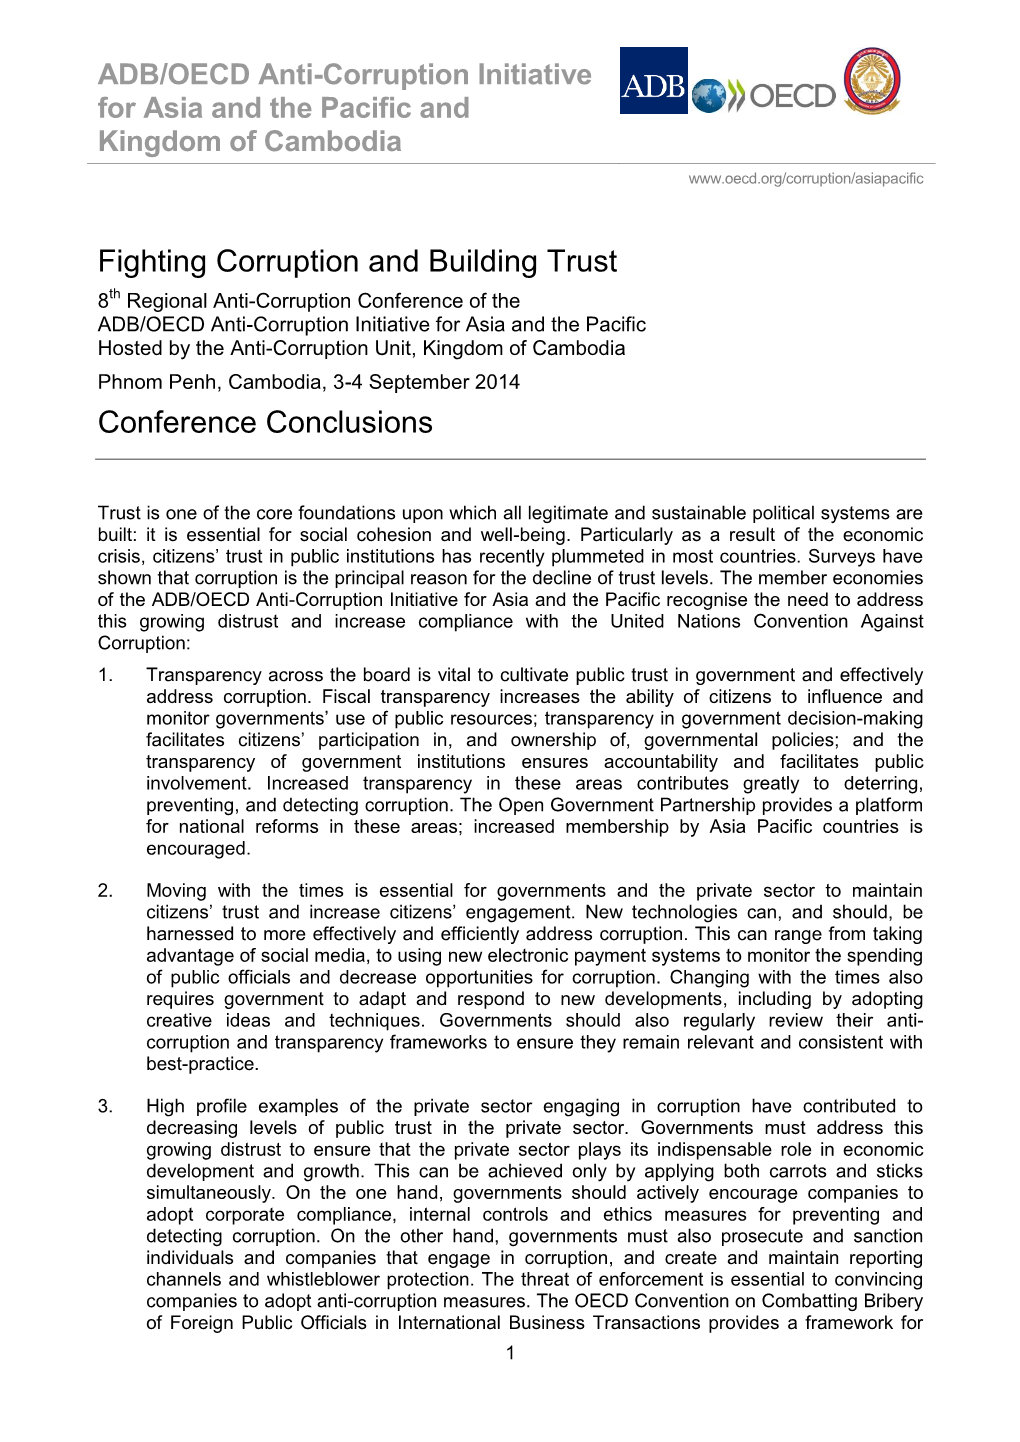 Fighting Corruption and Building Trust Conference Conclusions